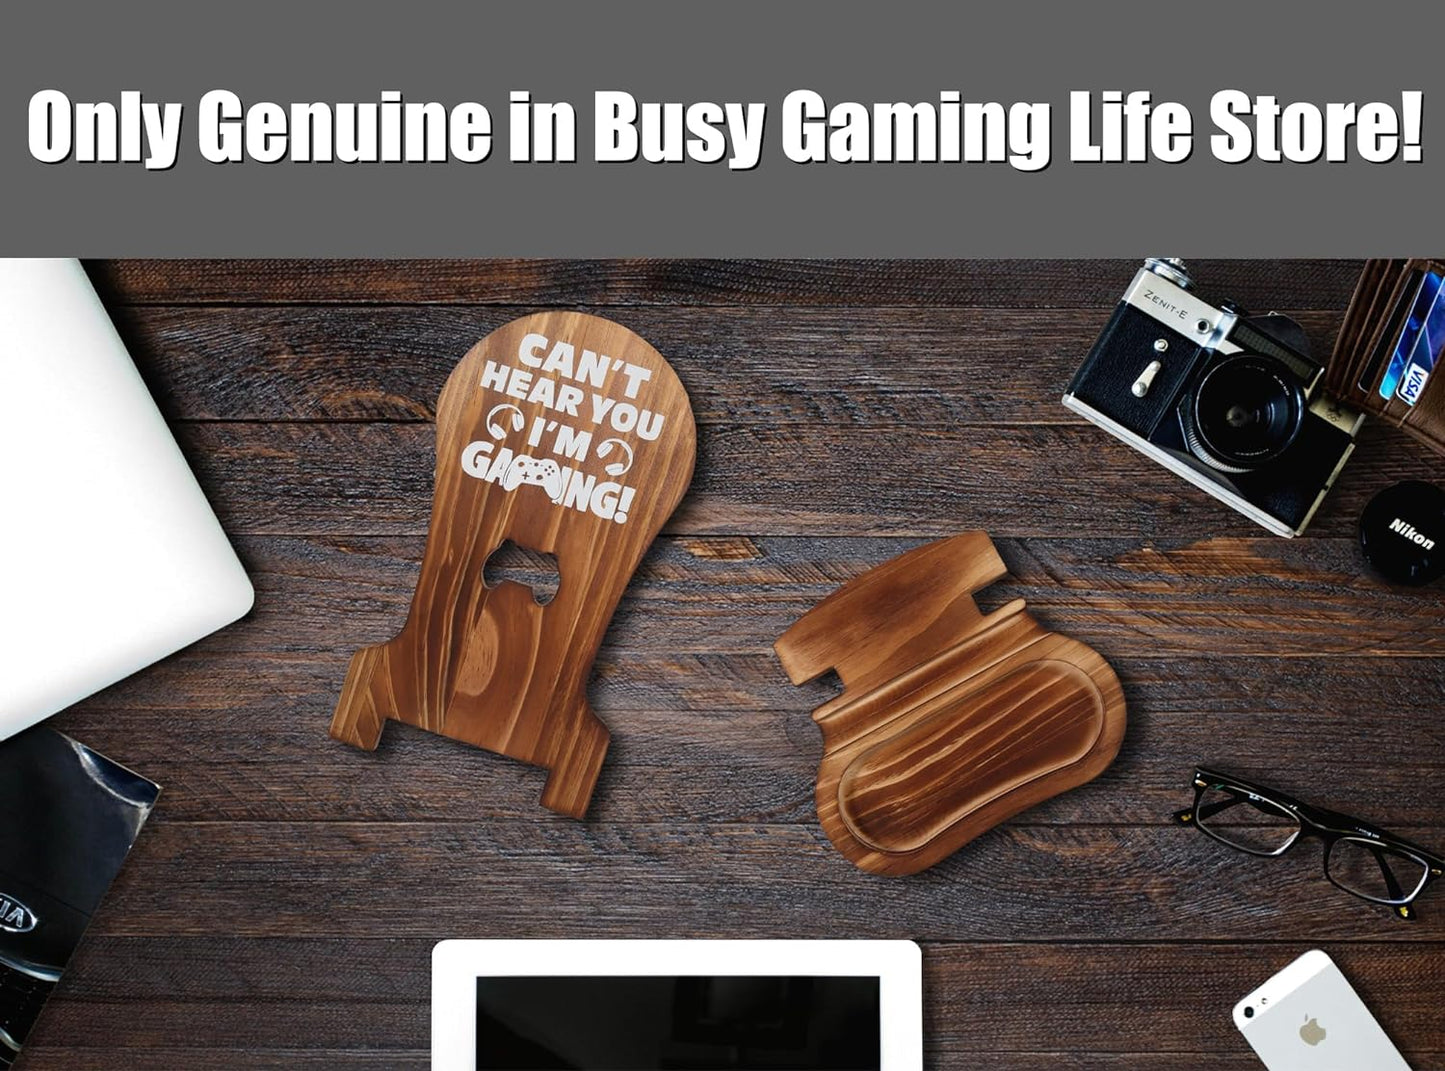 Gamer Gifts for Teenage Boy, Gamer Room Decor for Man, Best Gifts for Son, Boyfriend, Husband, Gaming Accessories, Wooden Gaming Headset Stand for Gaming Desktop- Can'T Hear You I'M Gaming